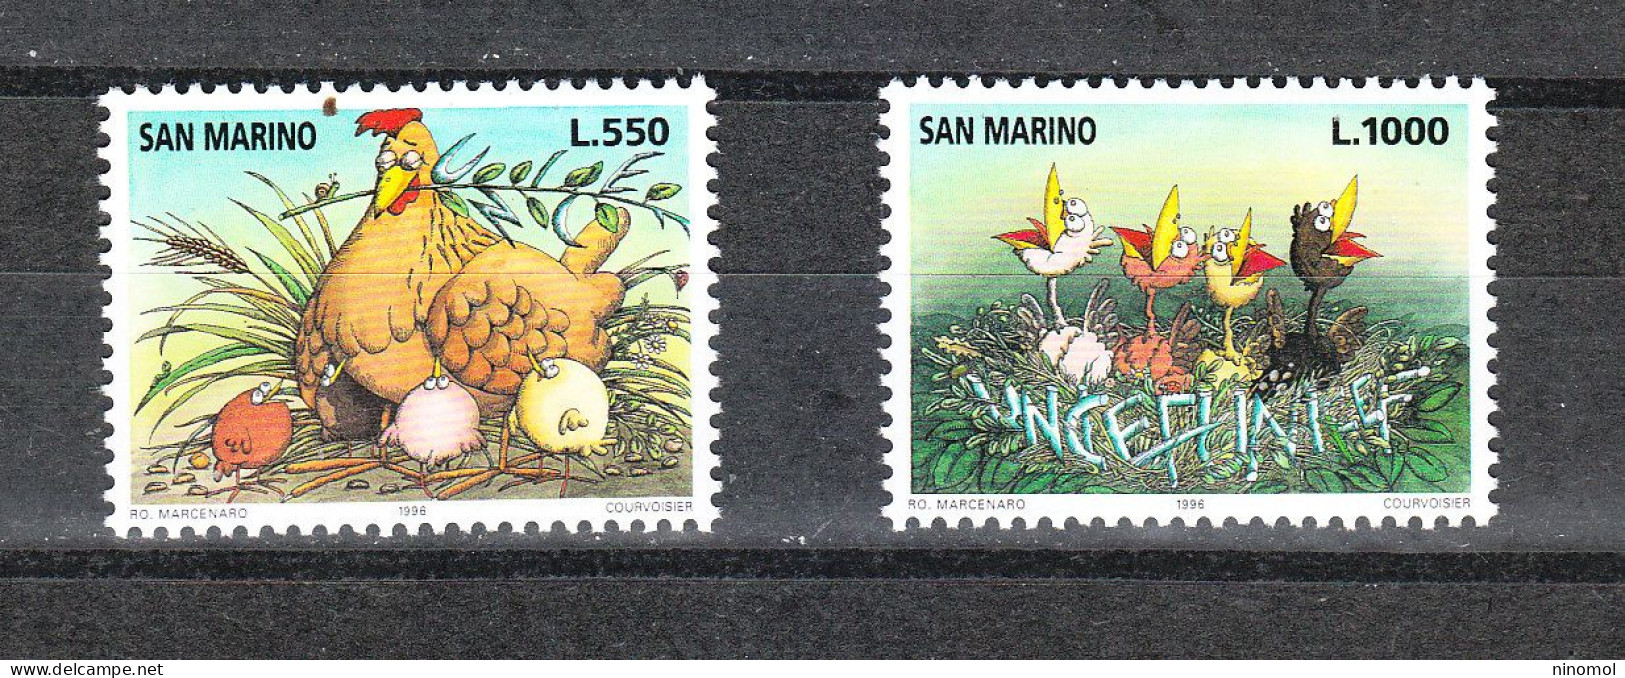 San Marino - 1996. UNICEF. Chioccia Con Pulcini.  Mother Hen With Chicks. Complete MNH Series - Gallinacées & Faisans